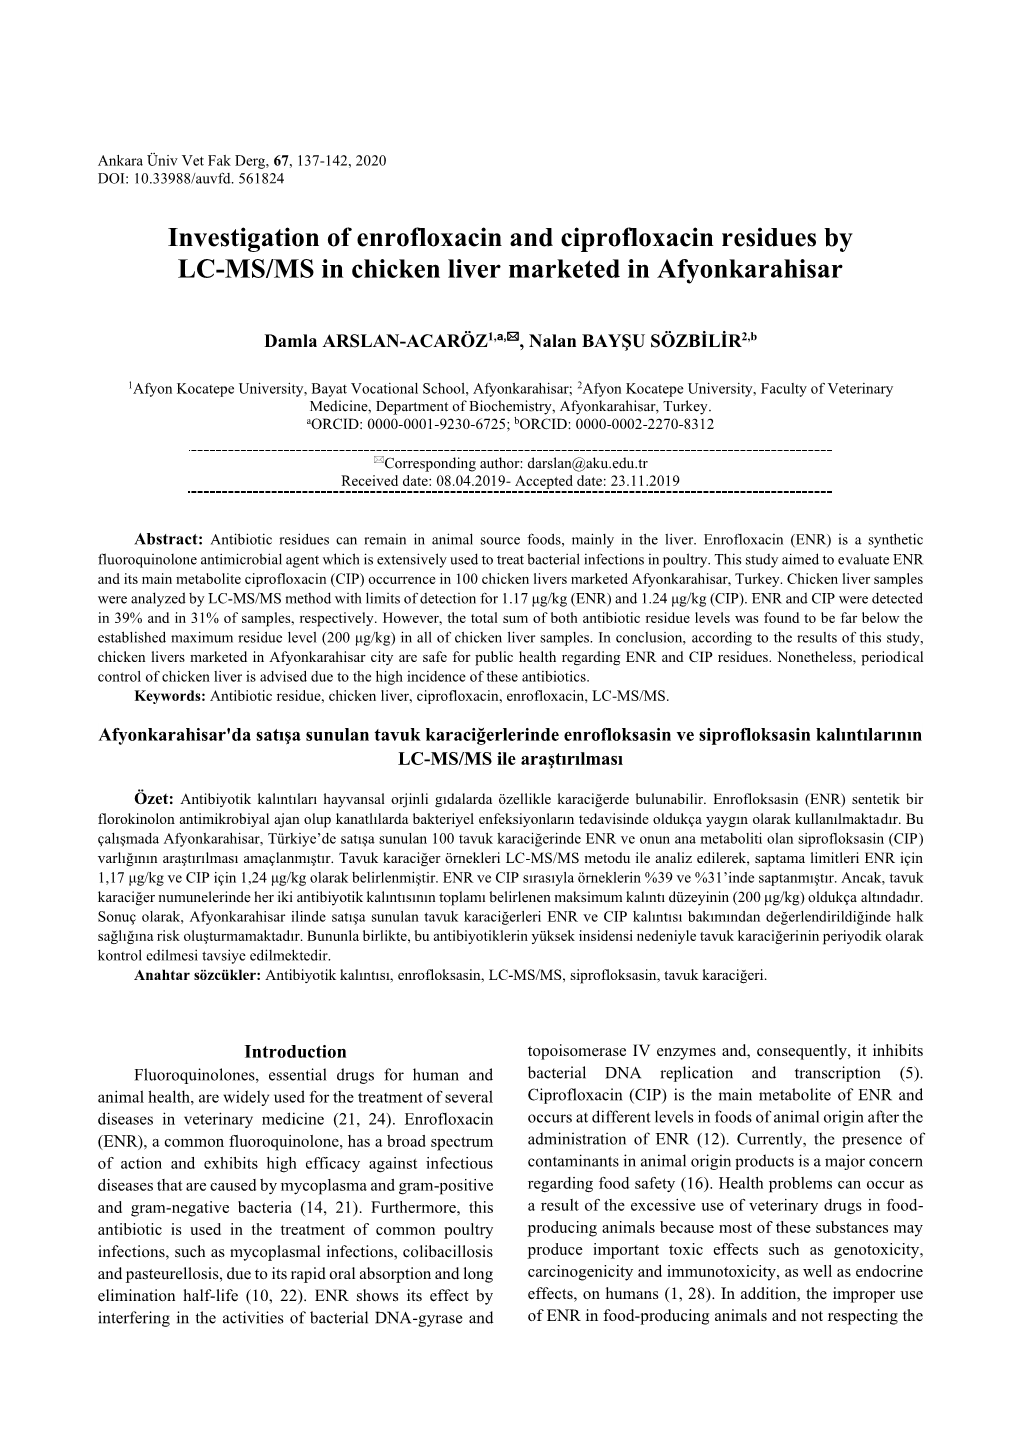 Investigation of Enrofloxacin and Ciprofloxacin Residues by LC-MS/MS in Chicken Liver Marketed in Afyonkarahisar